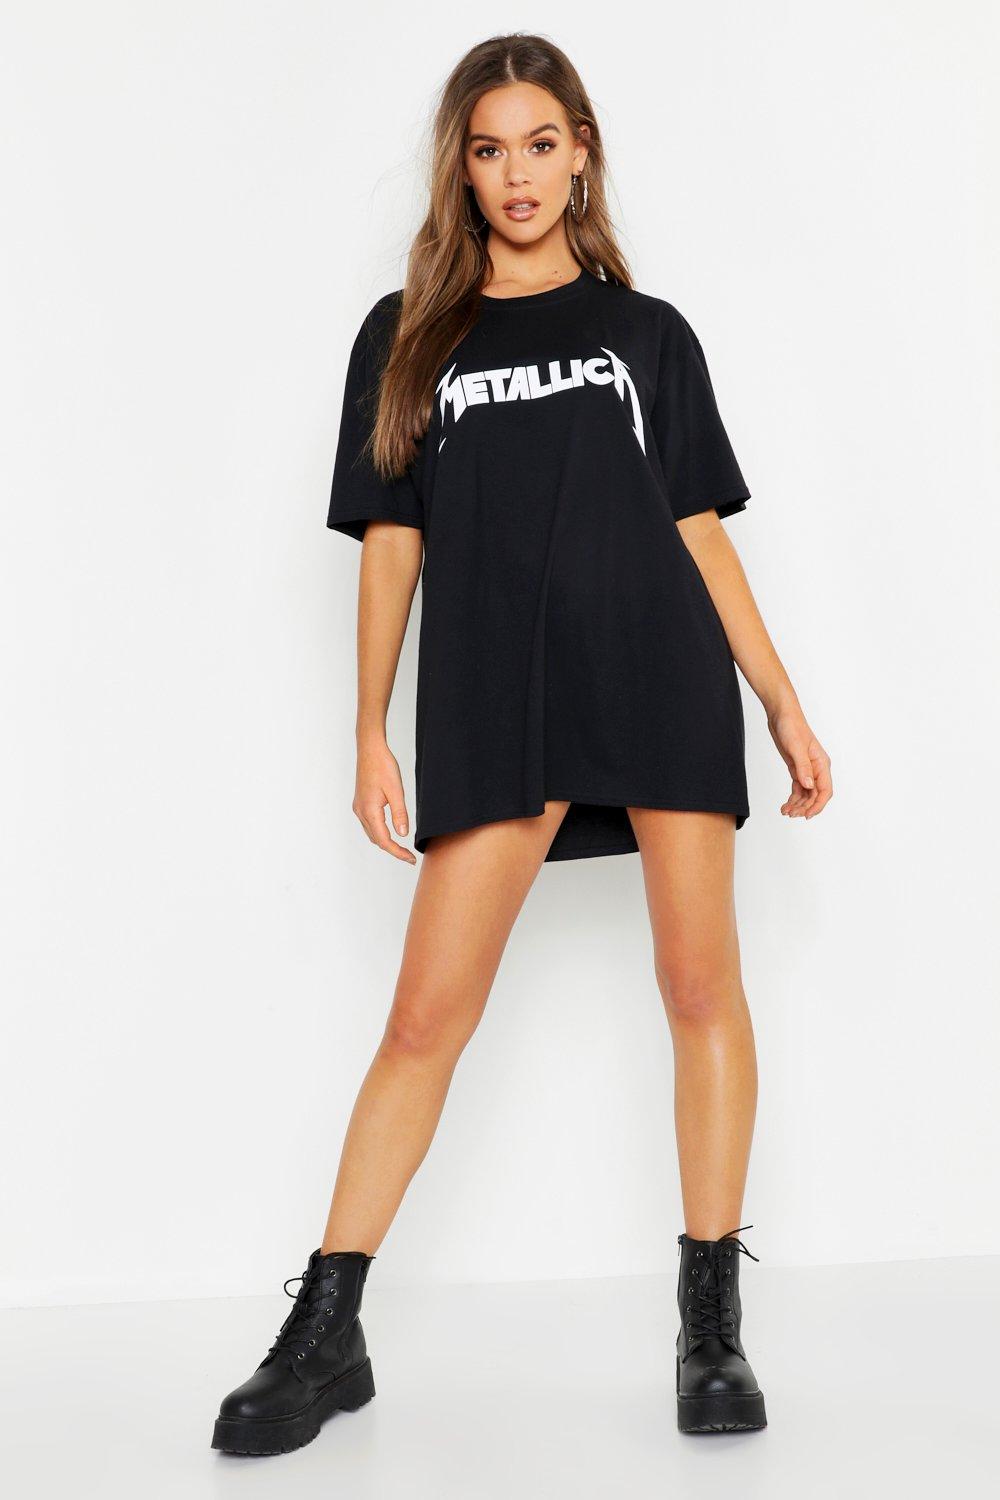 Black Oversized T Shirt Outfit Flash ...